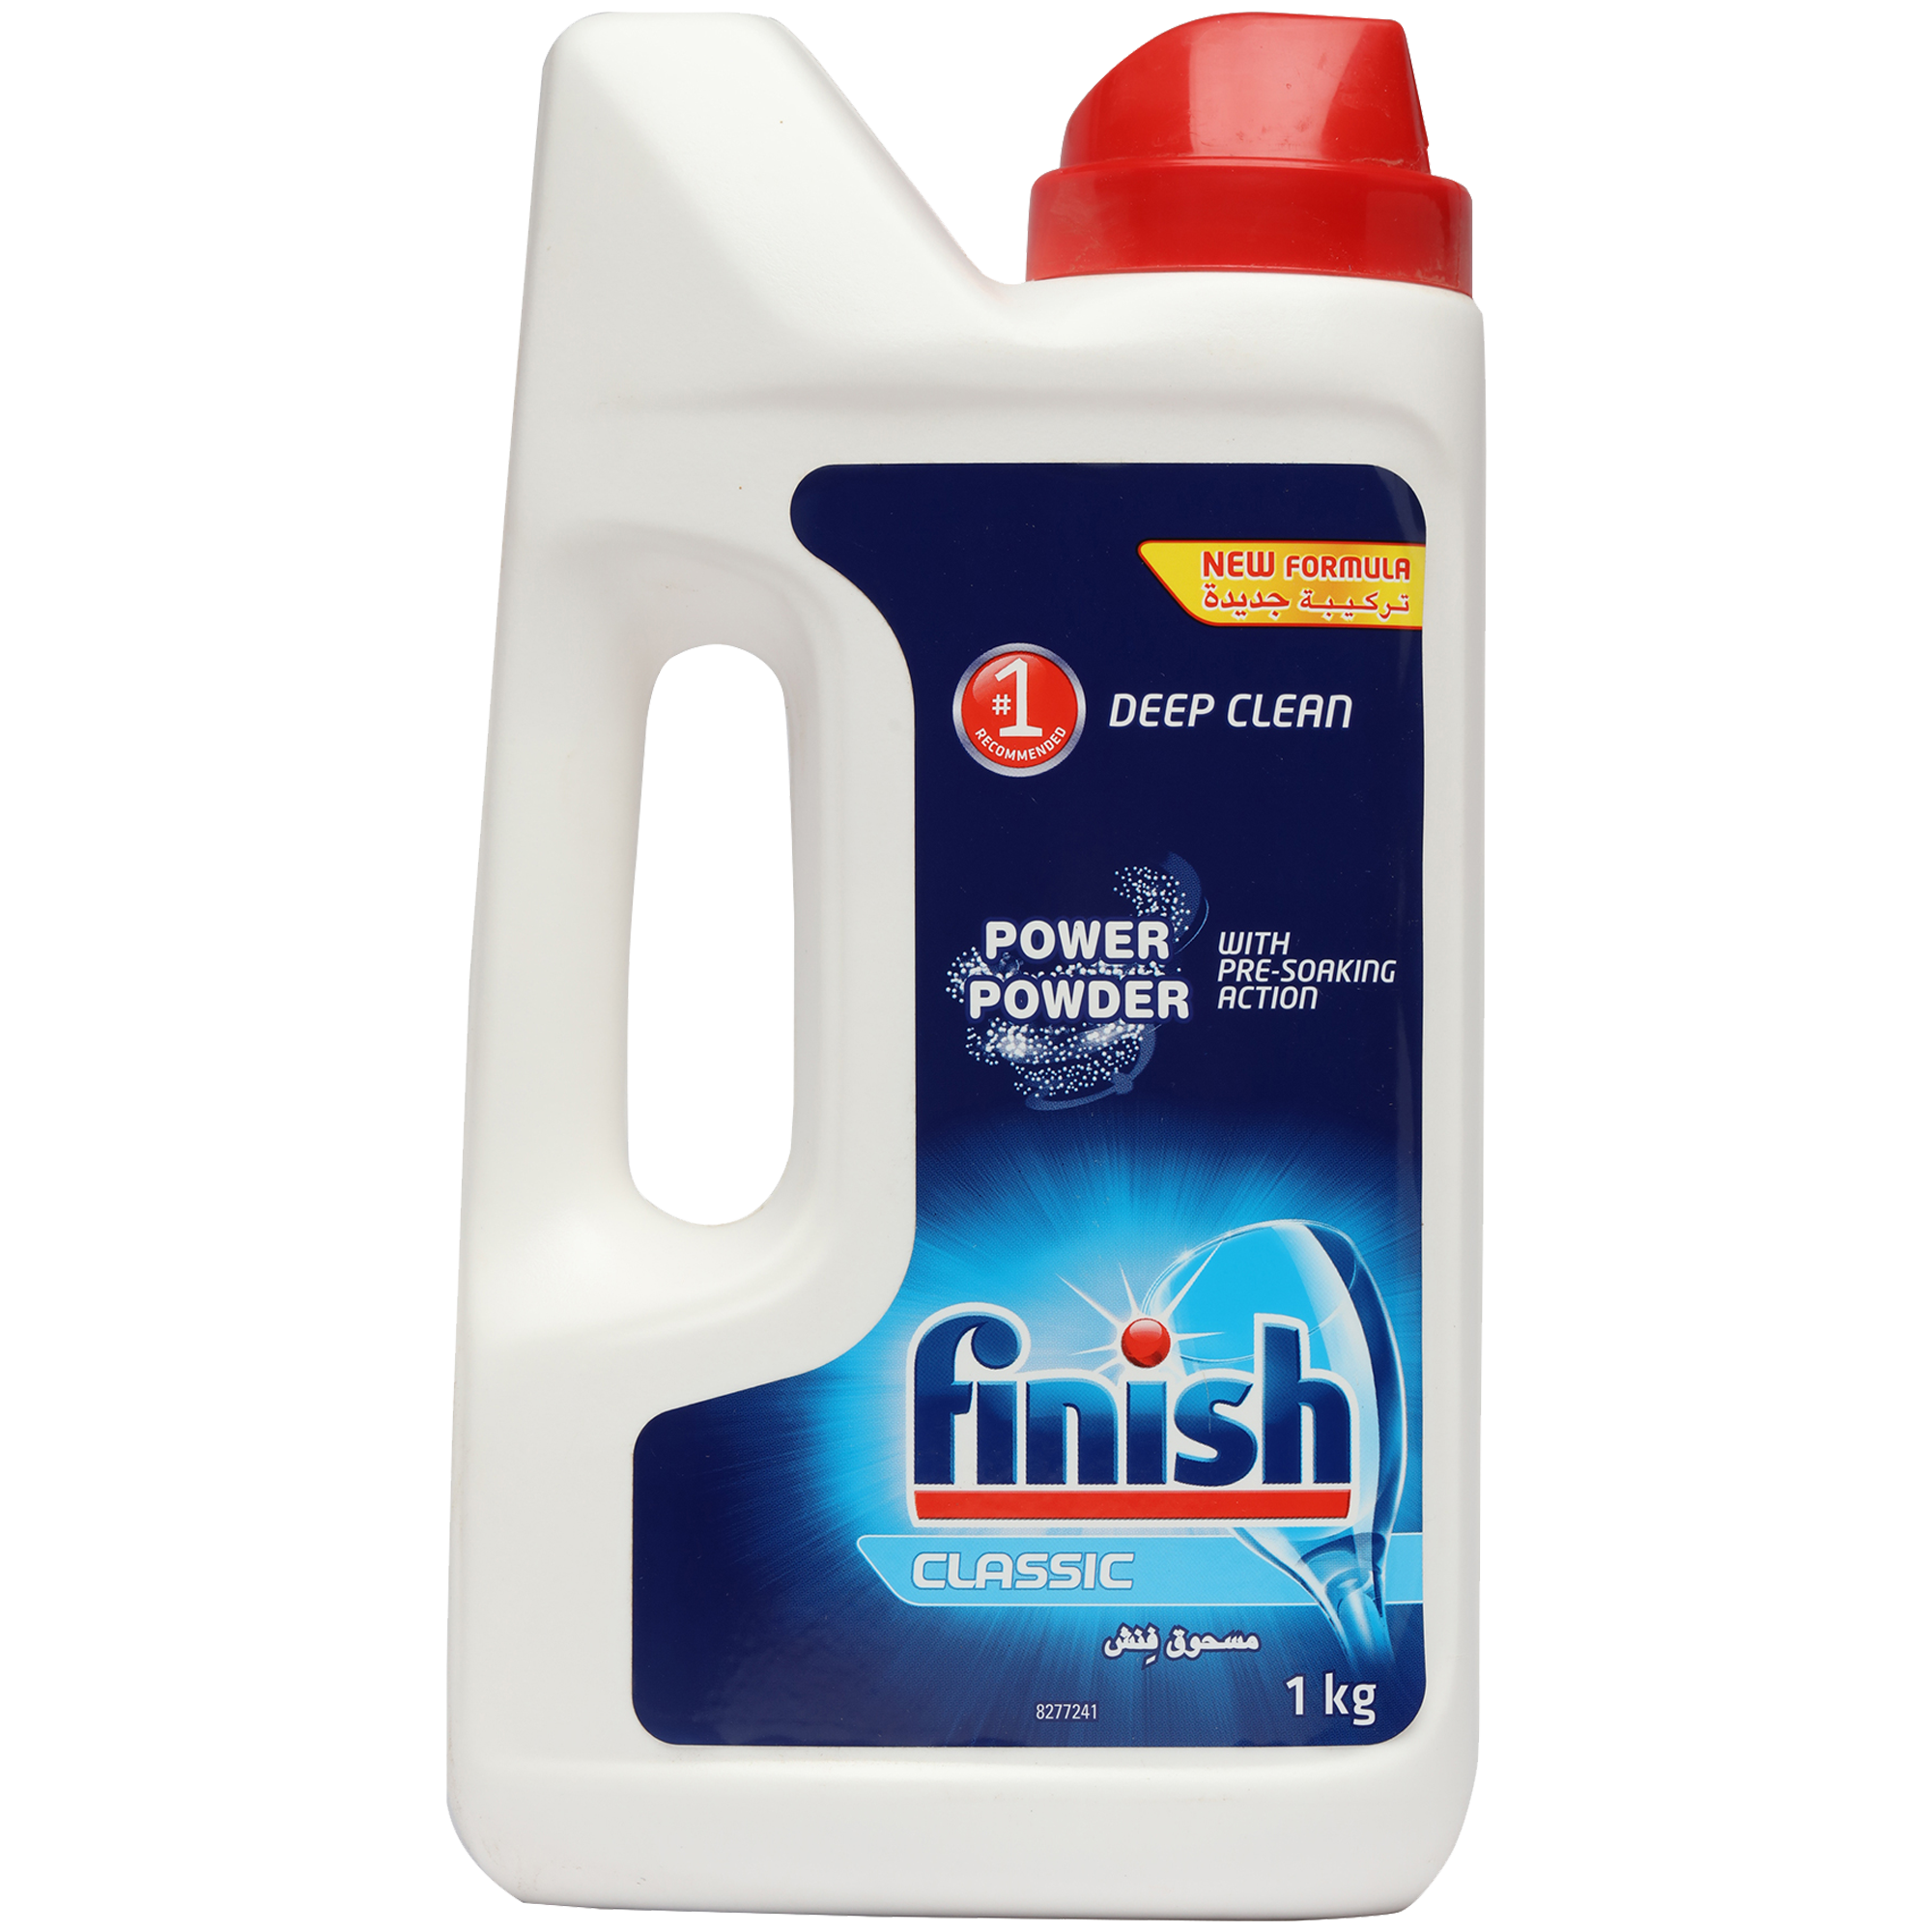 Finish Detergent Powder For Dishwasher (Remove Proteins, Starch and Oil Stains, 3035135, Blue)_1